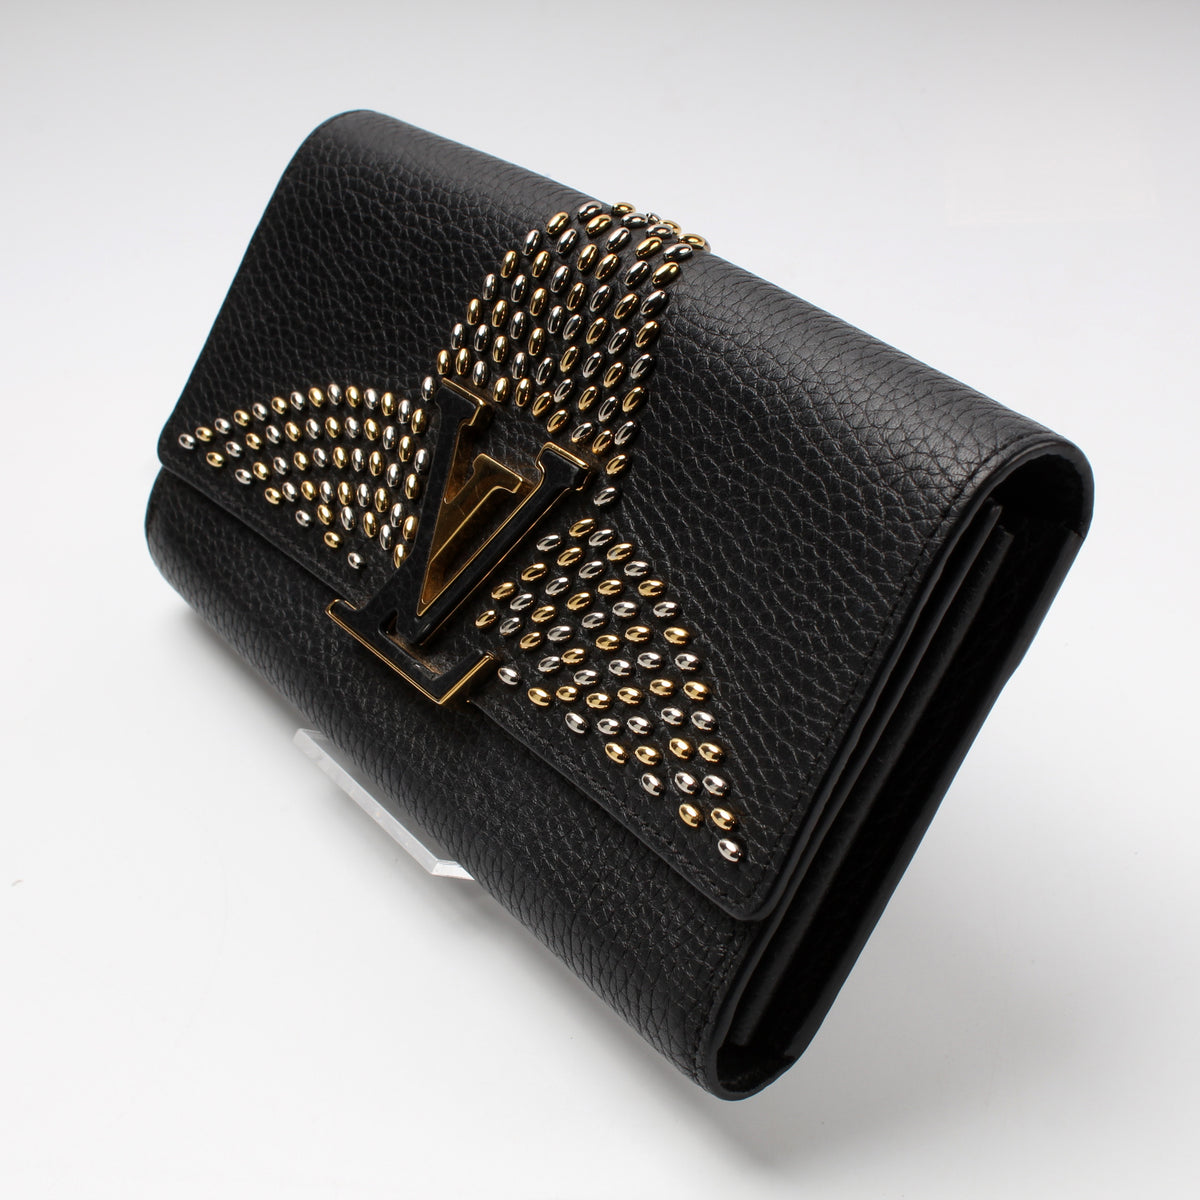 Louis Vuitton Capucines Compact Wallet Embellished Leather at